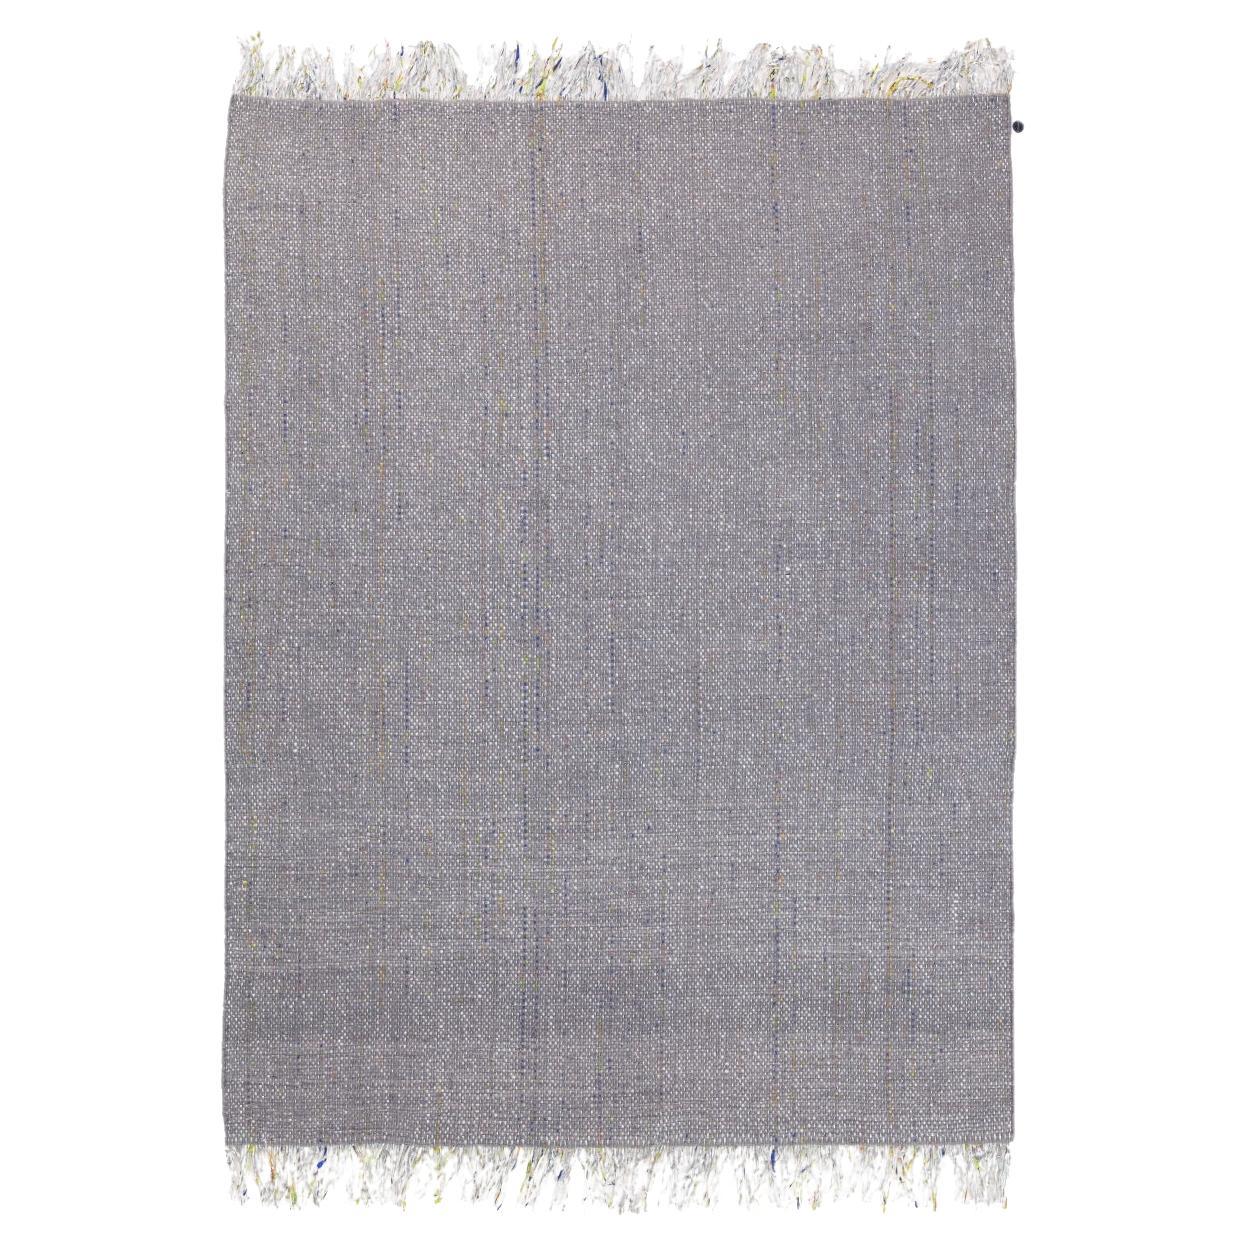 Candy Wrapper Rug_Dining_light gray / Award Winning Woven Rug by Jutta Werner For Sale